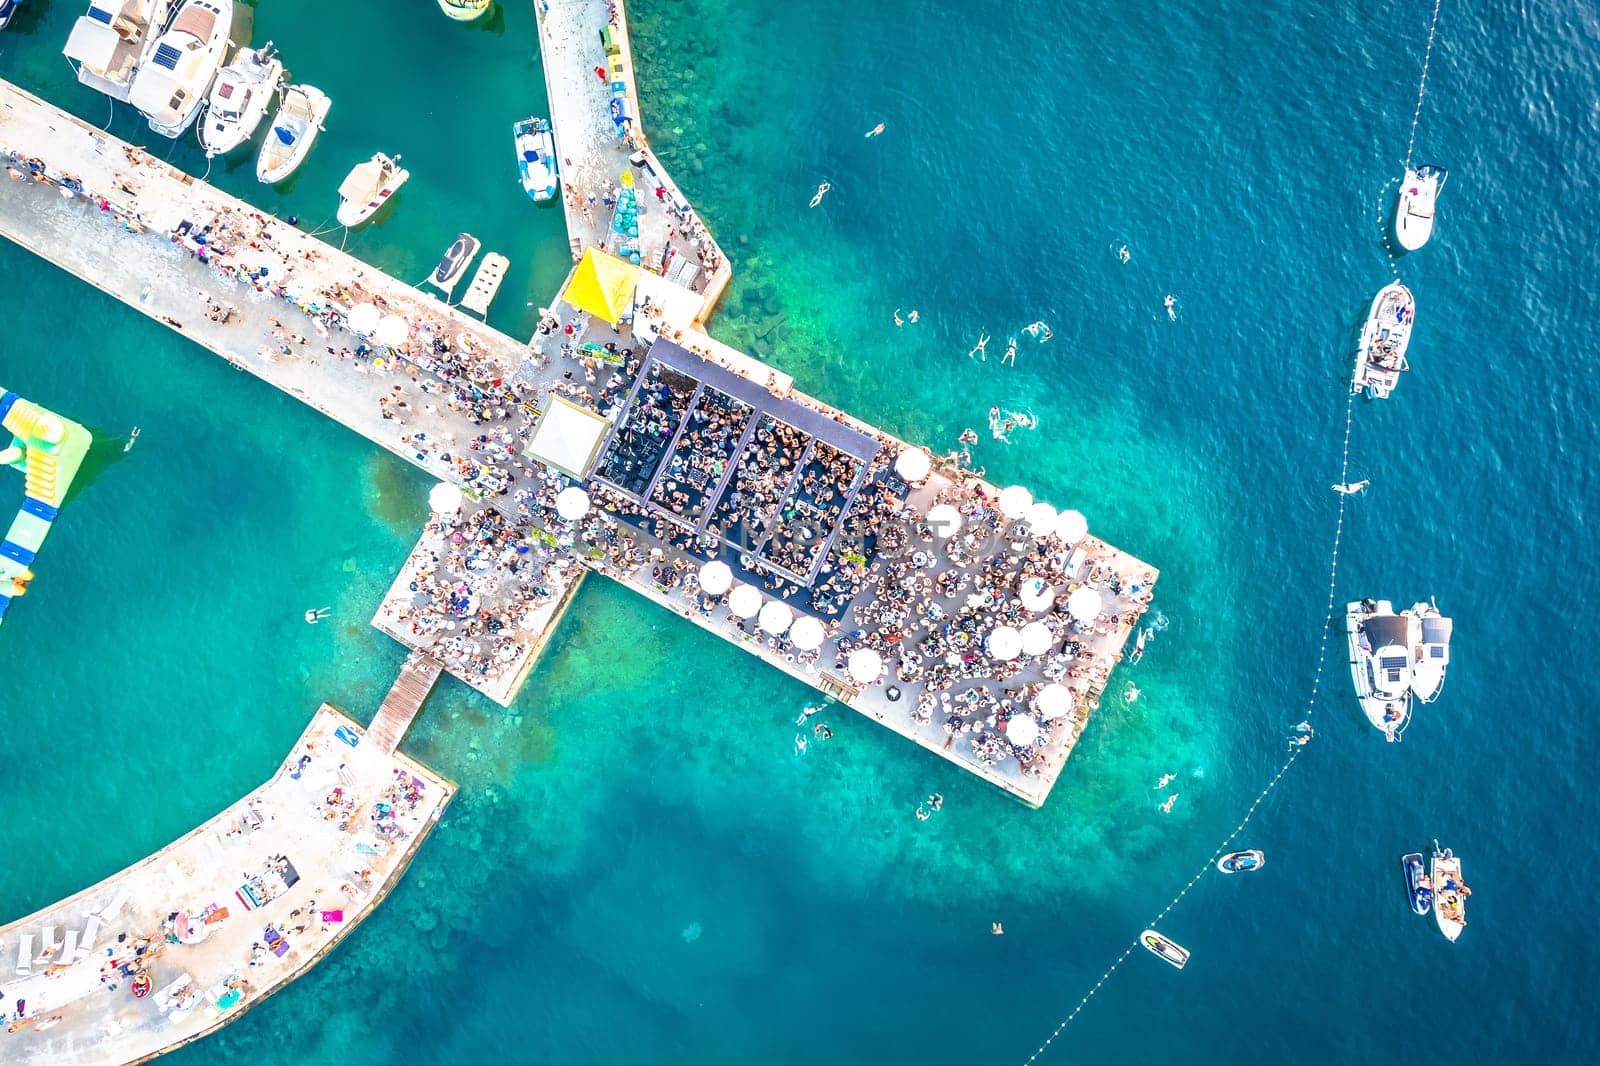 Beach party on pier aerial view by xbrchx